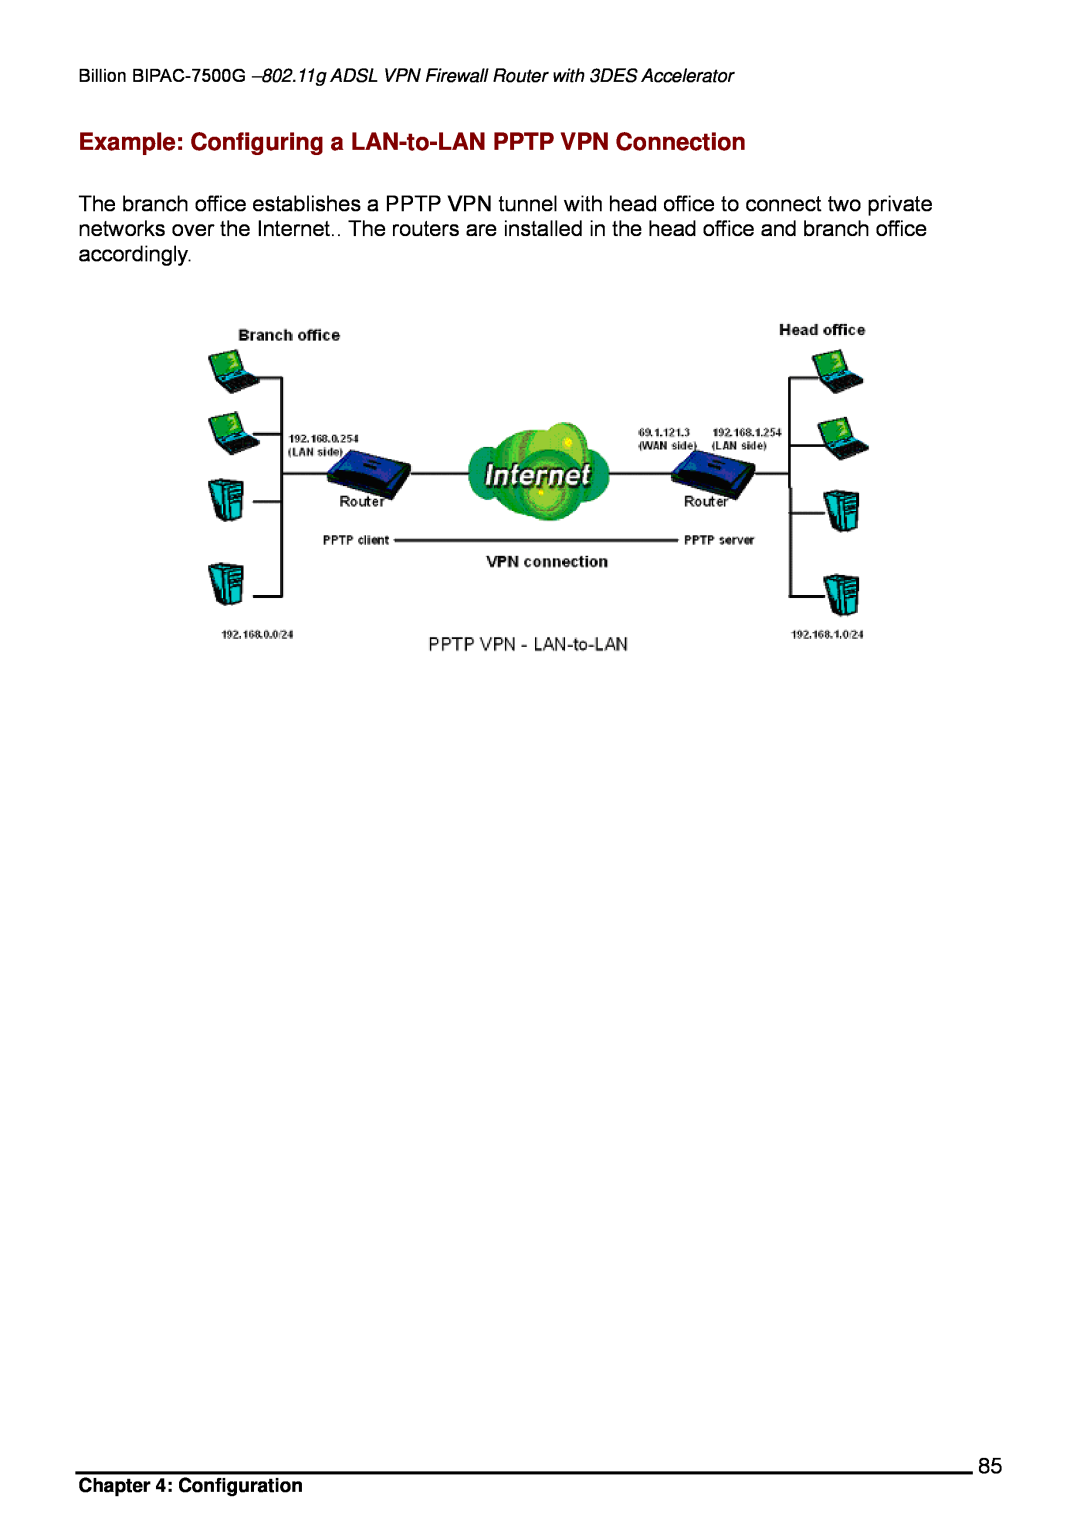 Billion Electric Company BIPAC-7500G user manual Example Configuring a LAN-to-LAN PPTP VPN Connection, Configuration 